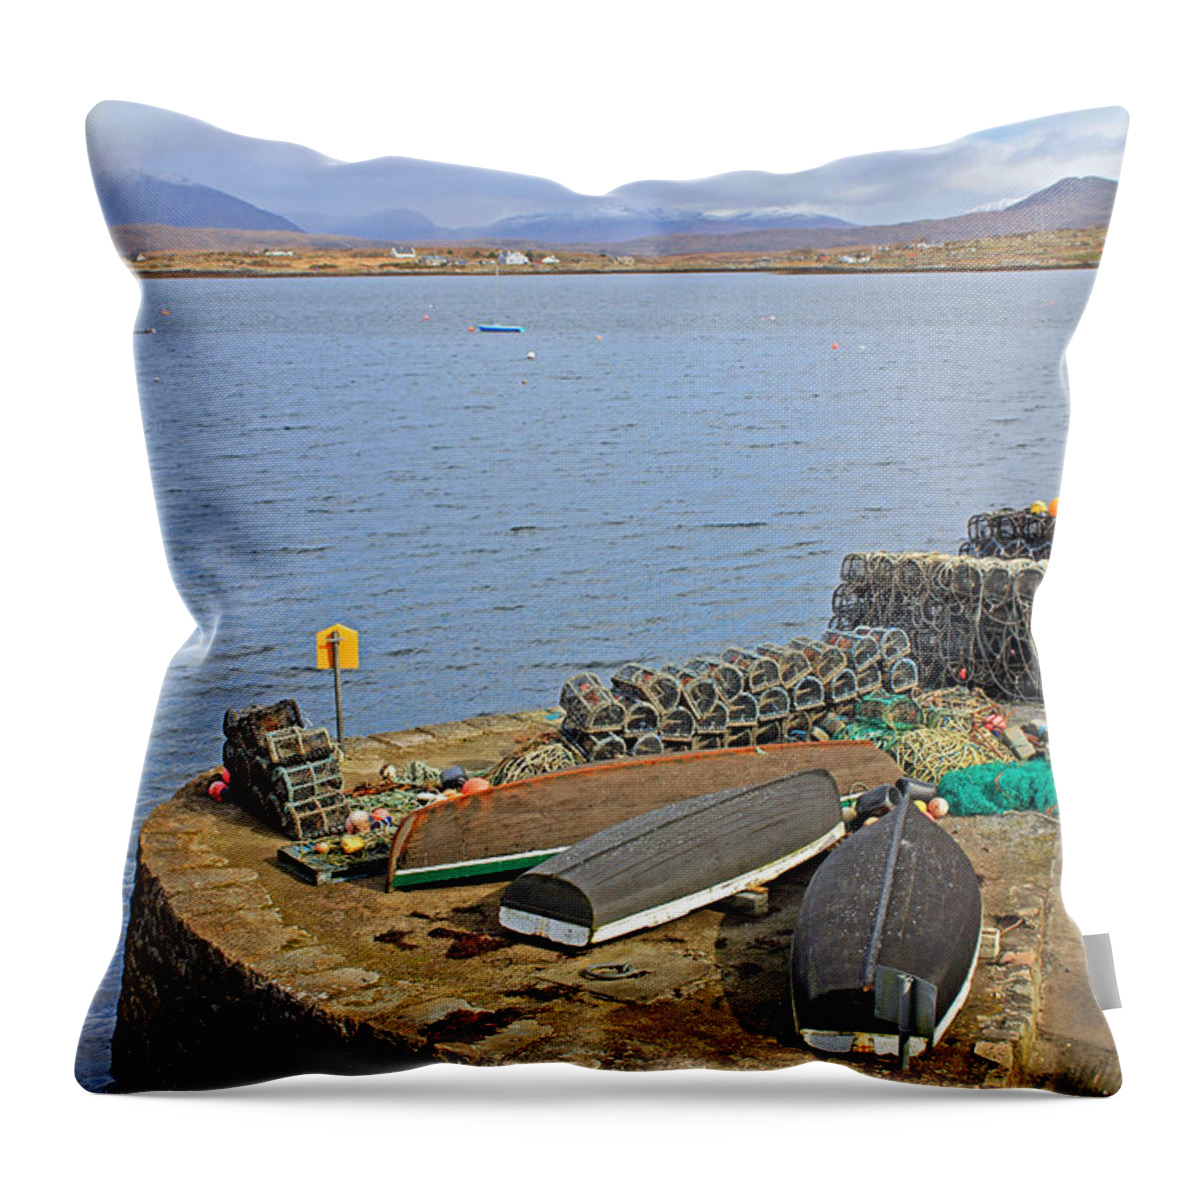 Boats Throw Pillow featuring the photograph At the Dock by Jennifer Robin